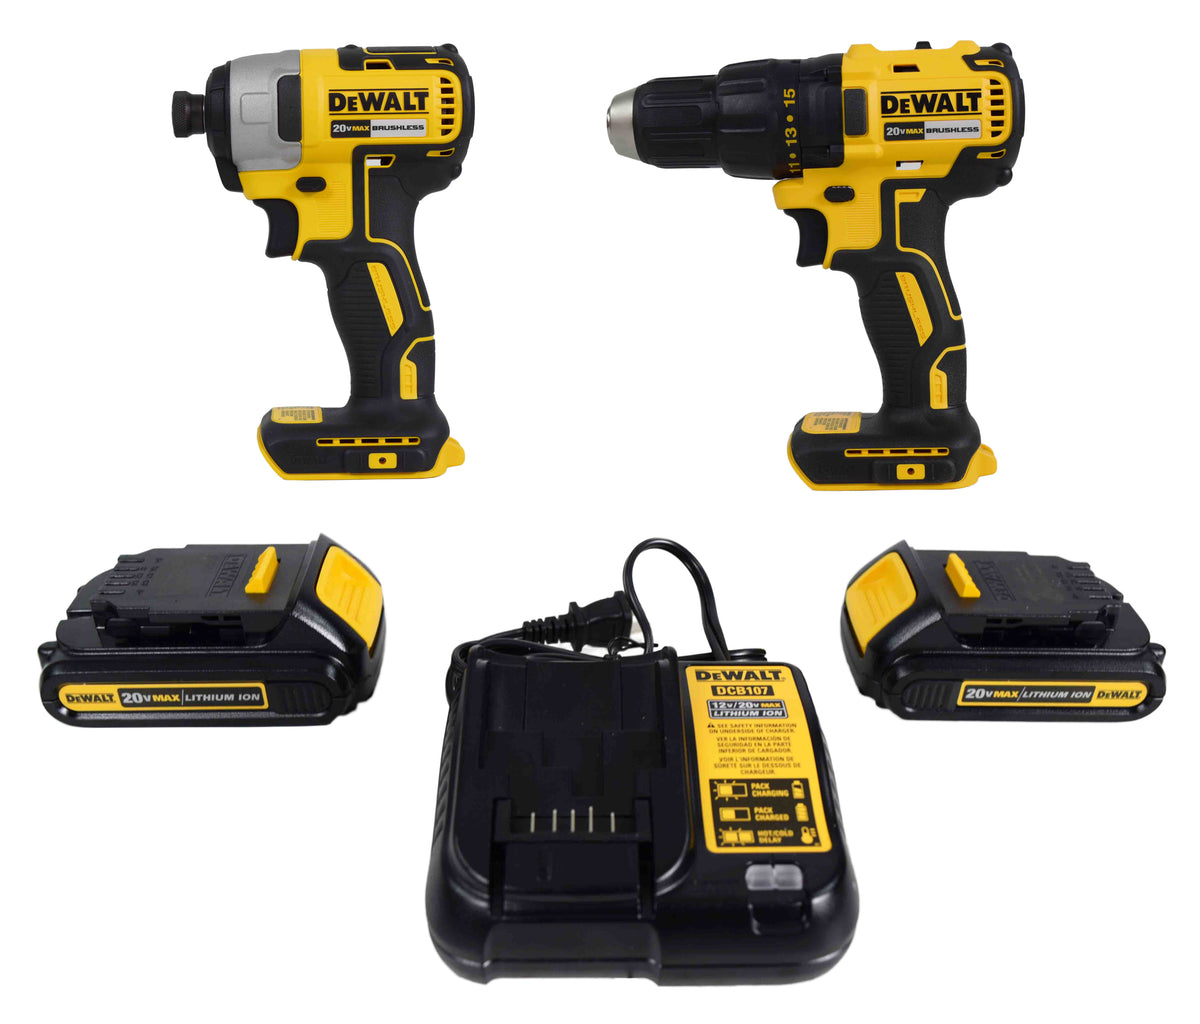 20V MAX Compact Brushless Drill Driver and Impact Kit (DCK277C2)